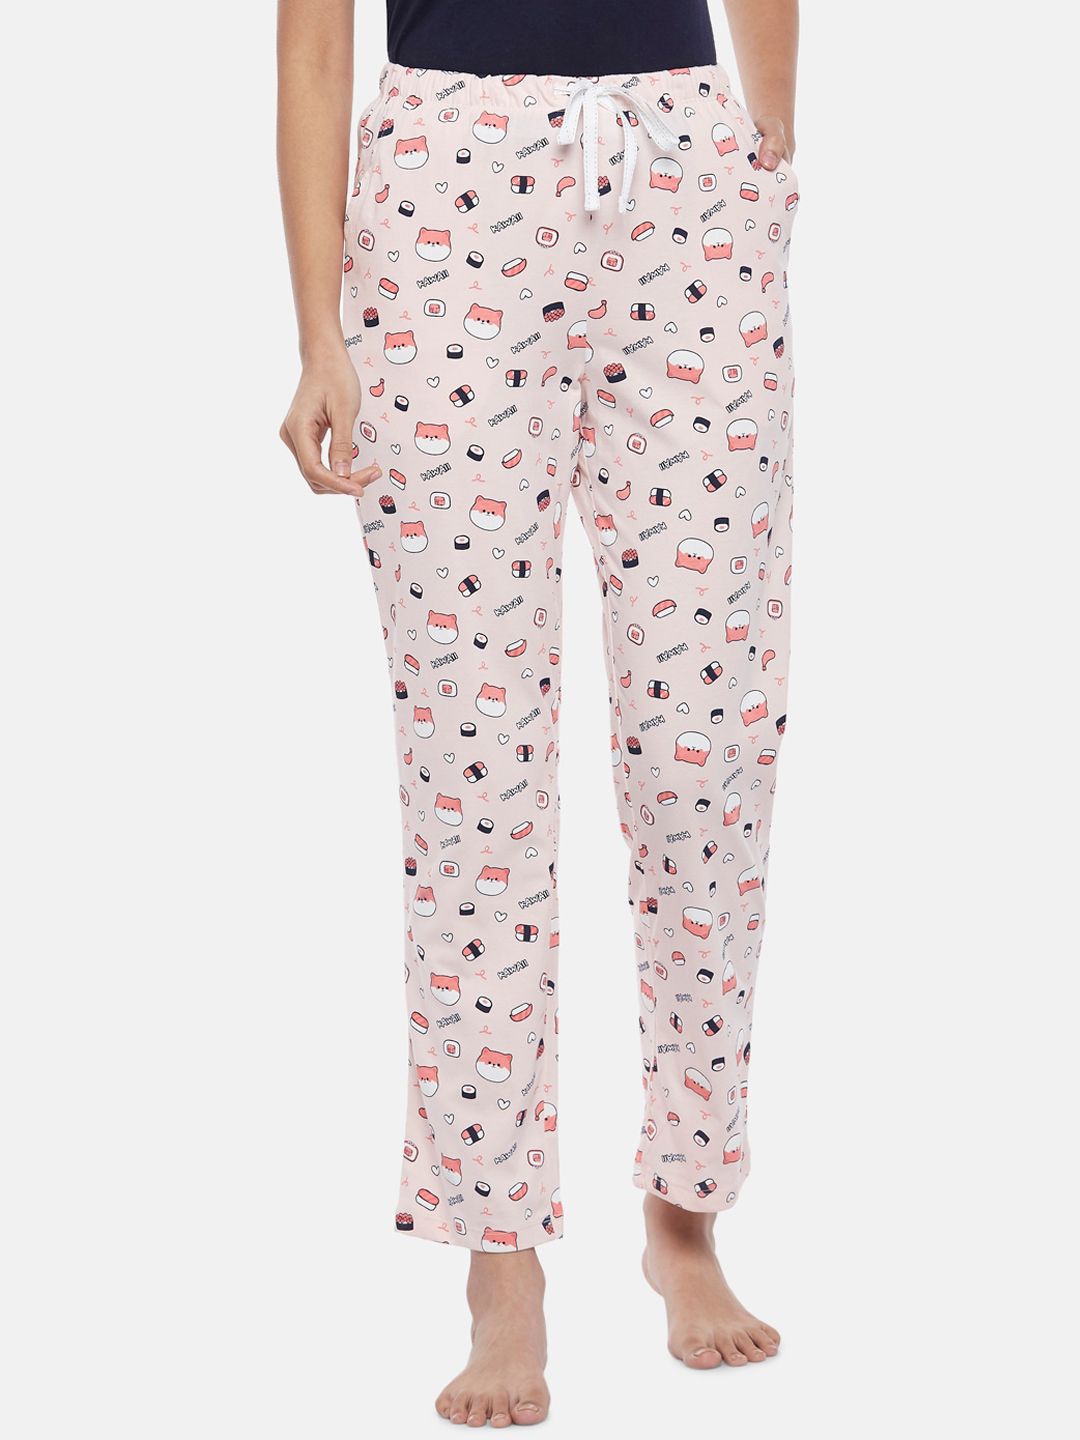 Dreamz by Pantaloons Women Pink Printed Cotton Lounge Pants Price in India